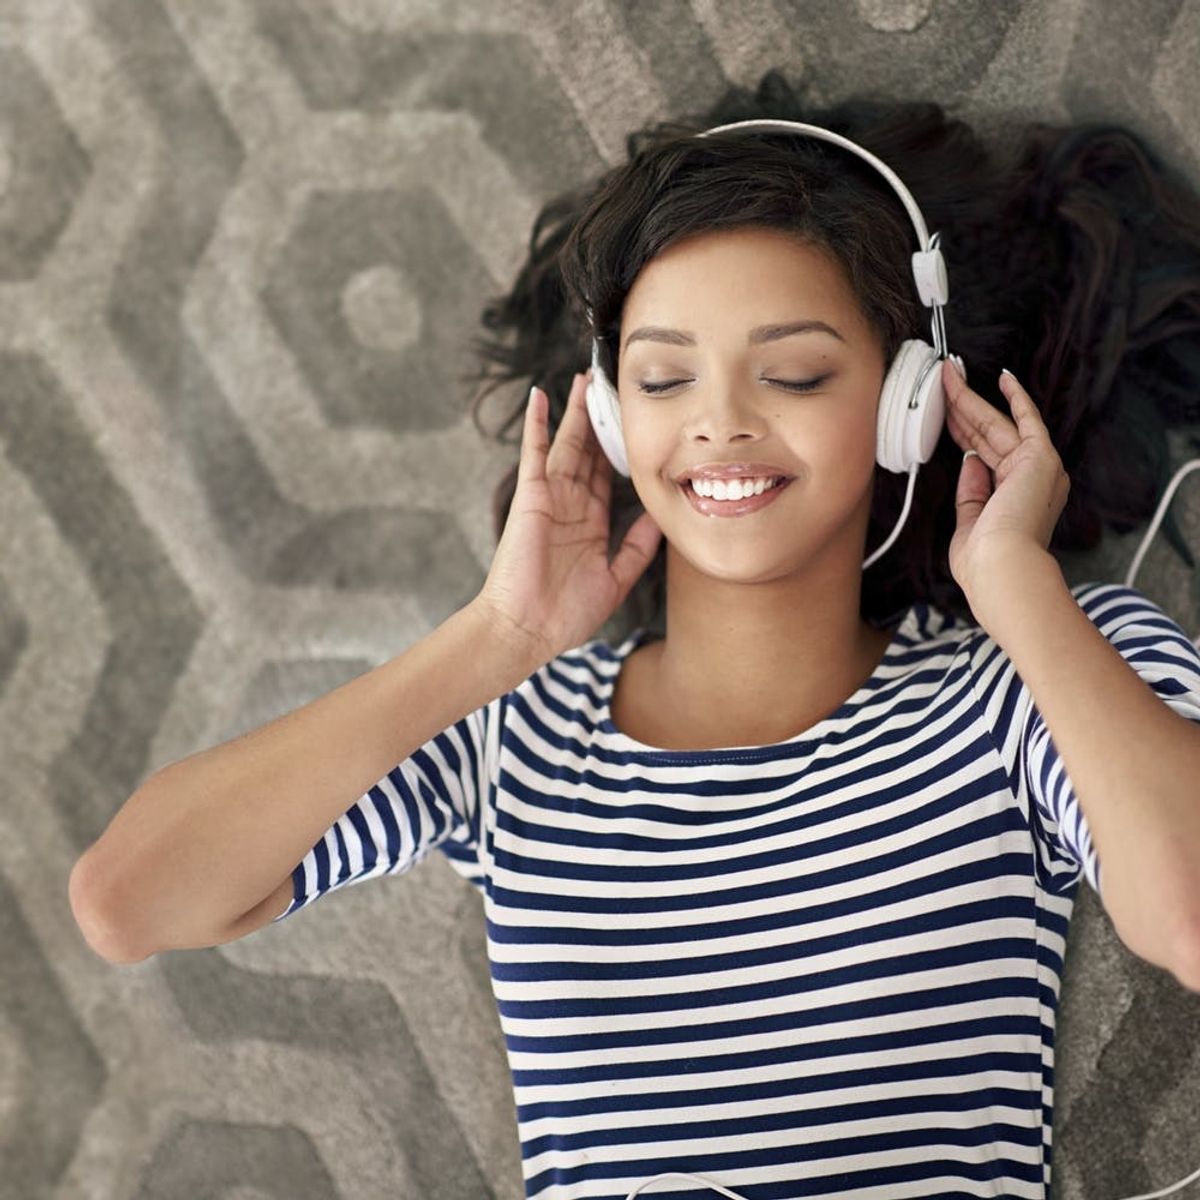 A Composer Explains Why Music Can Help You Feel Happier